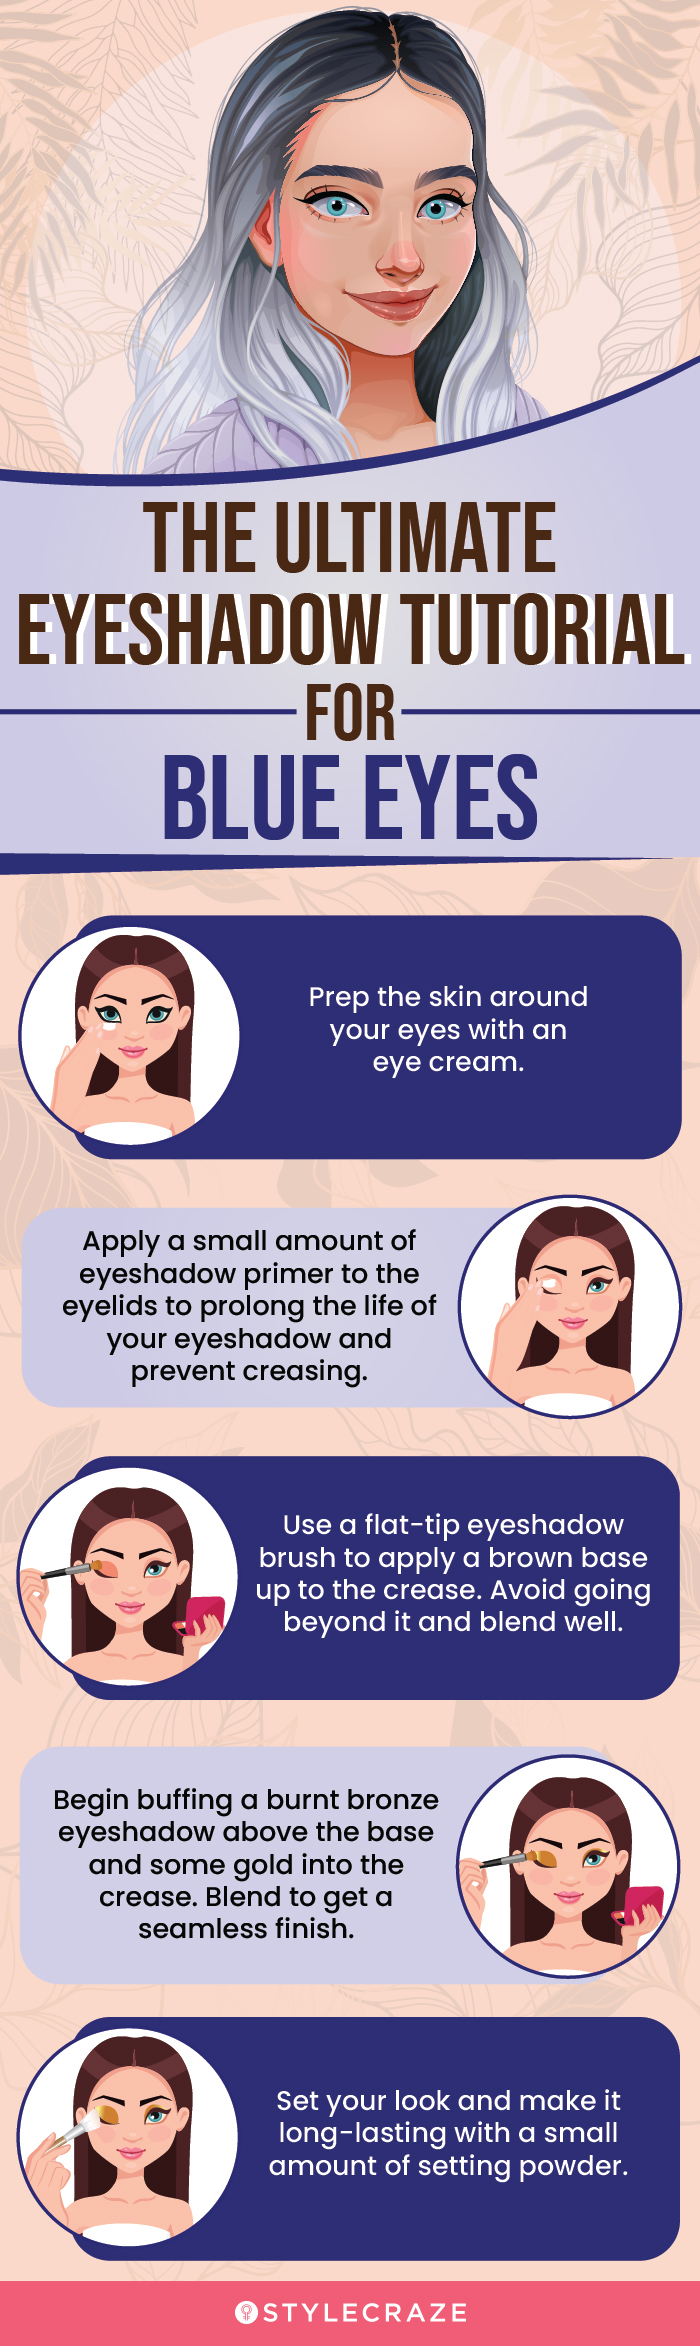 The Ultimate Eyeshadow Tutorial For Blue Eyes (infographic)